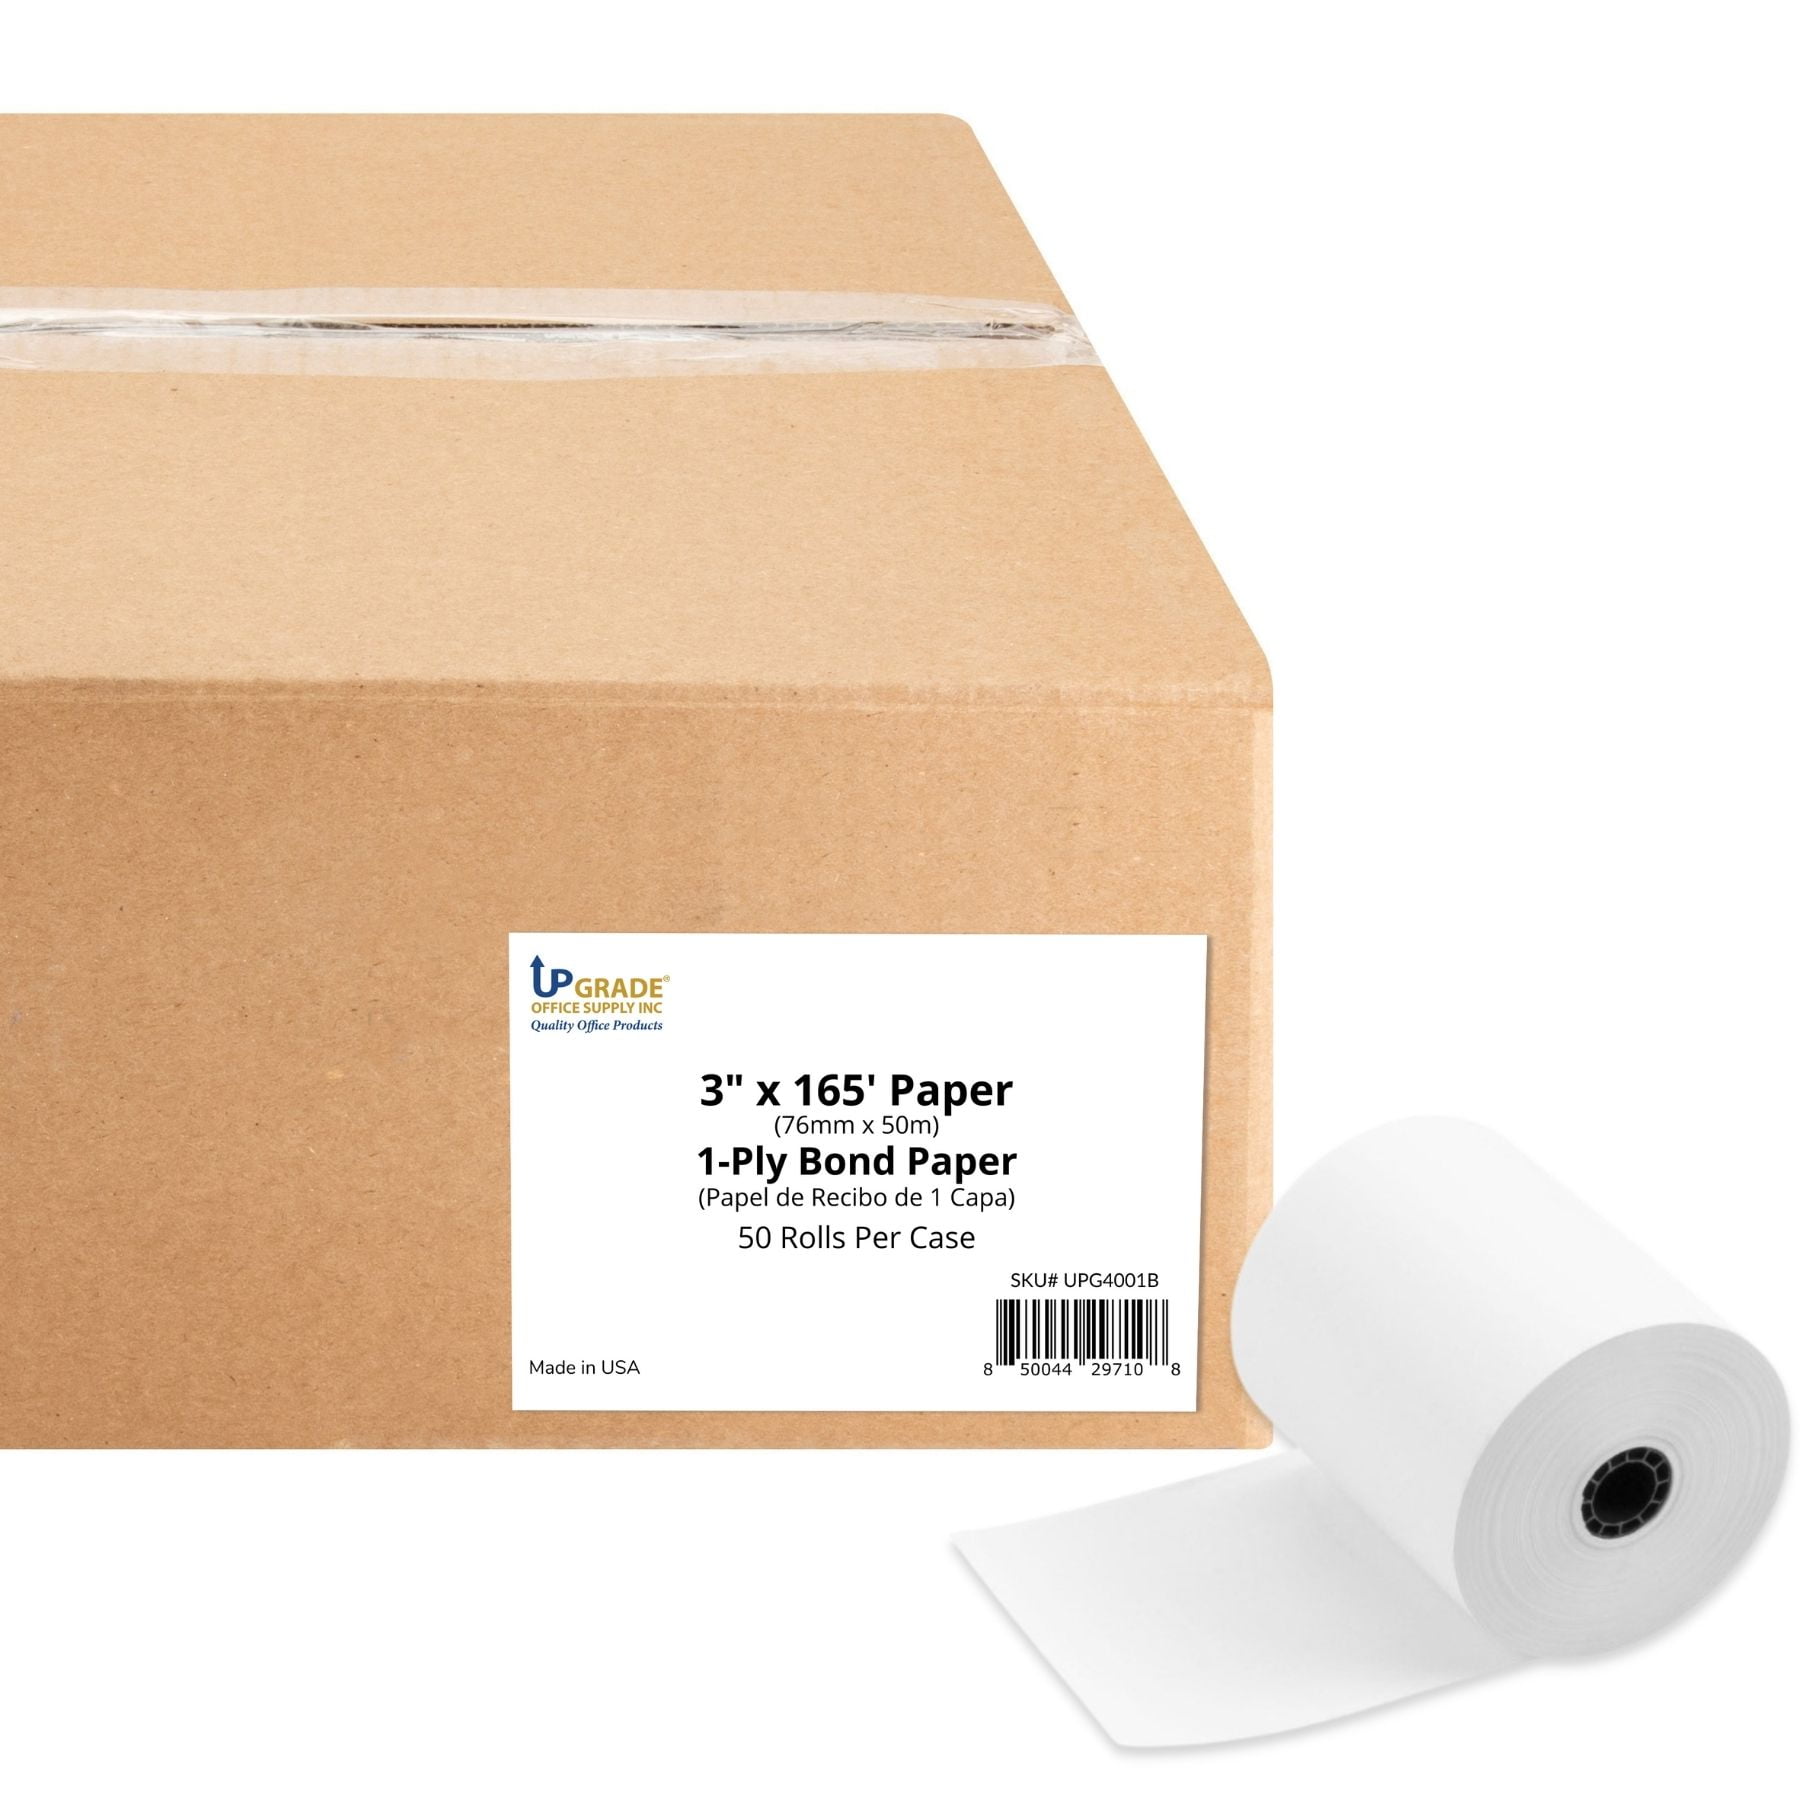 Office Depot Brand 3 Hole Punched Multi Use Printer Copier Paper Letter  Size 8 12 x 11 Ream Of 500 Sheets 96 U.S. Brightness 20 Lb White - Office  Depot